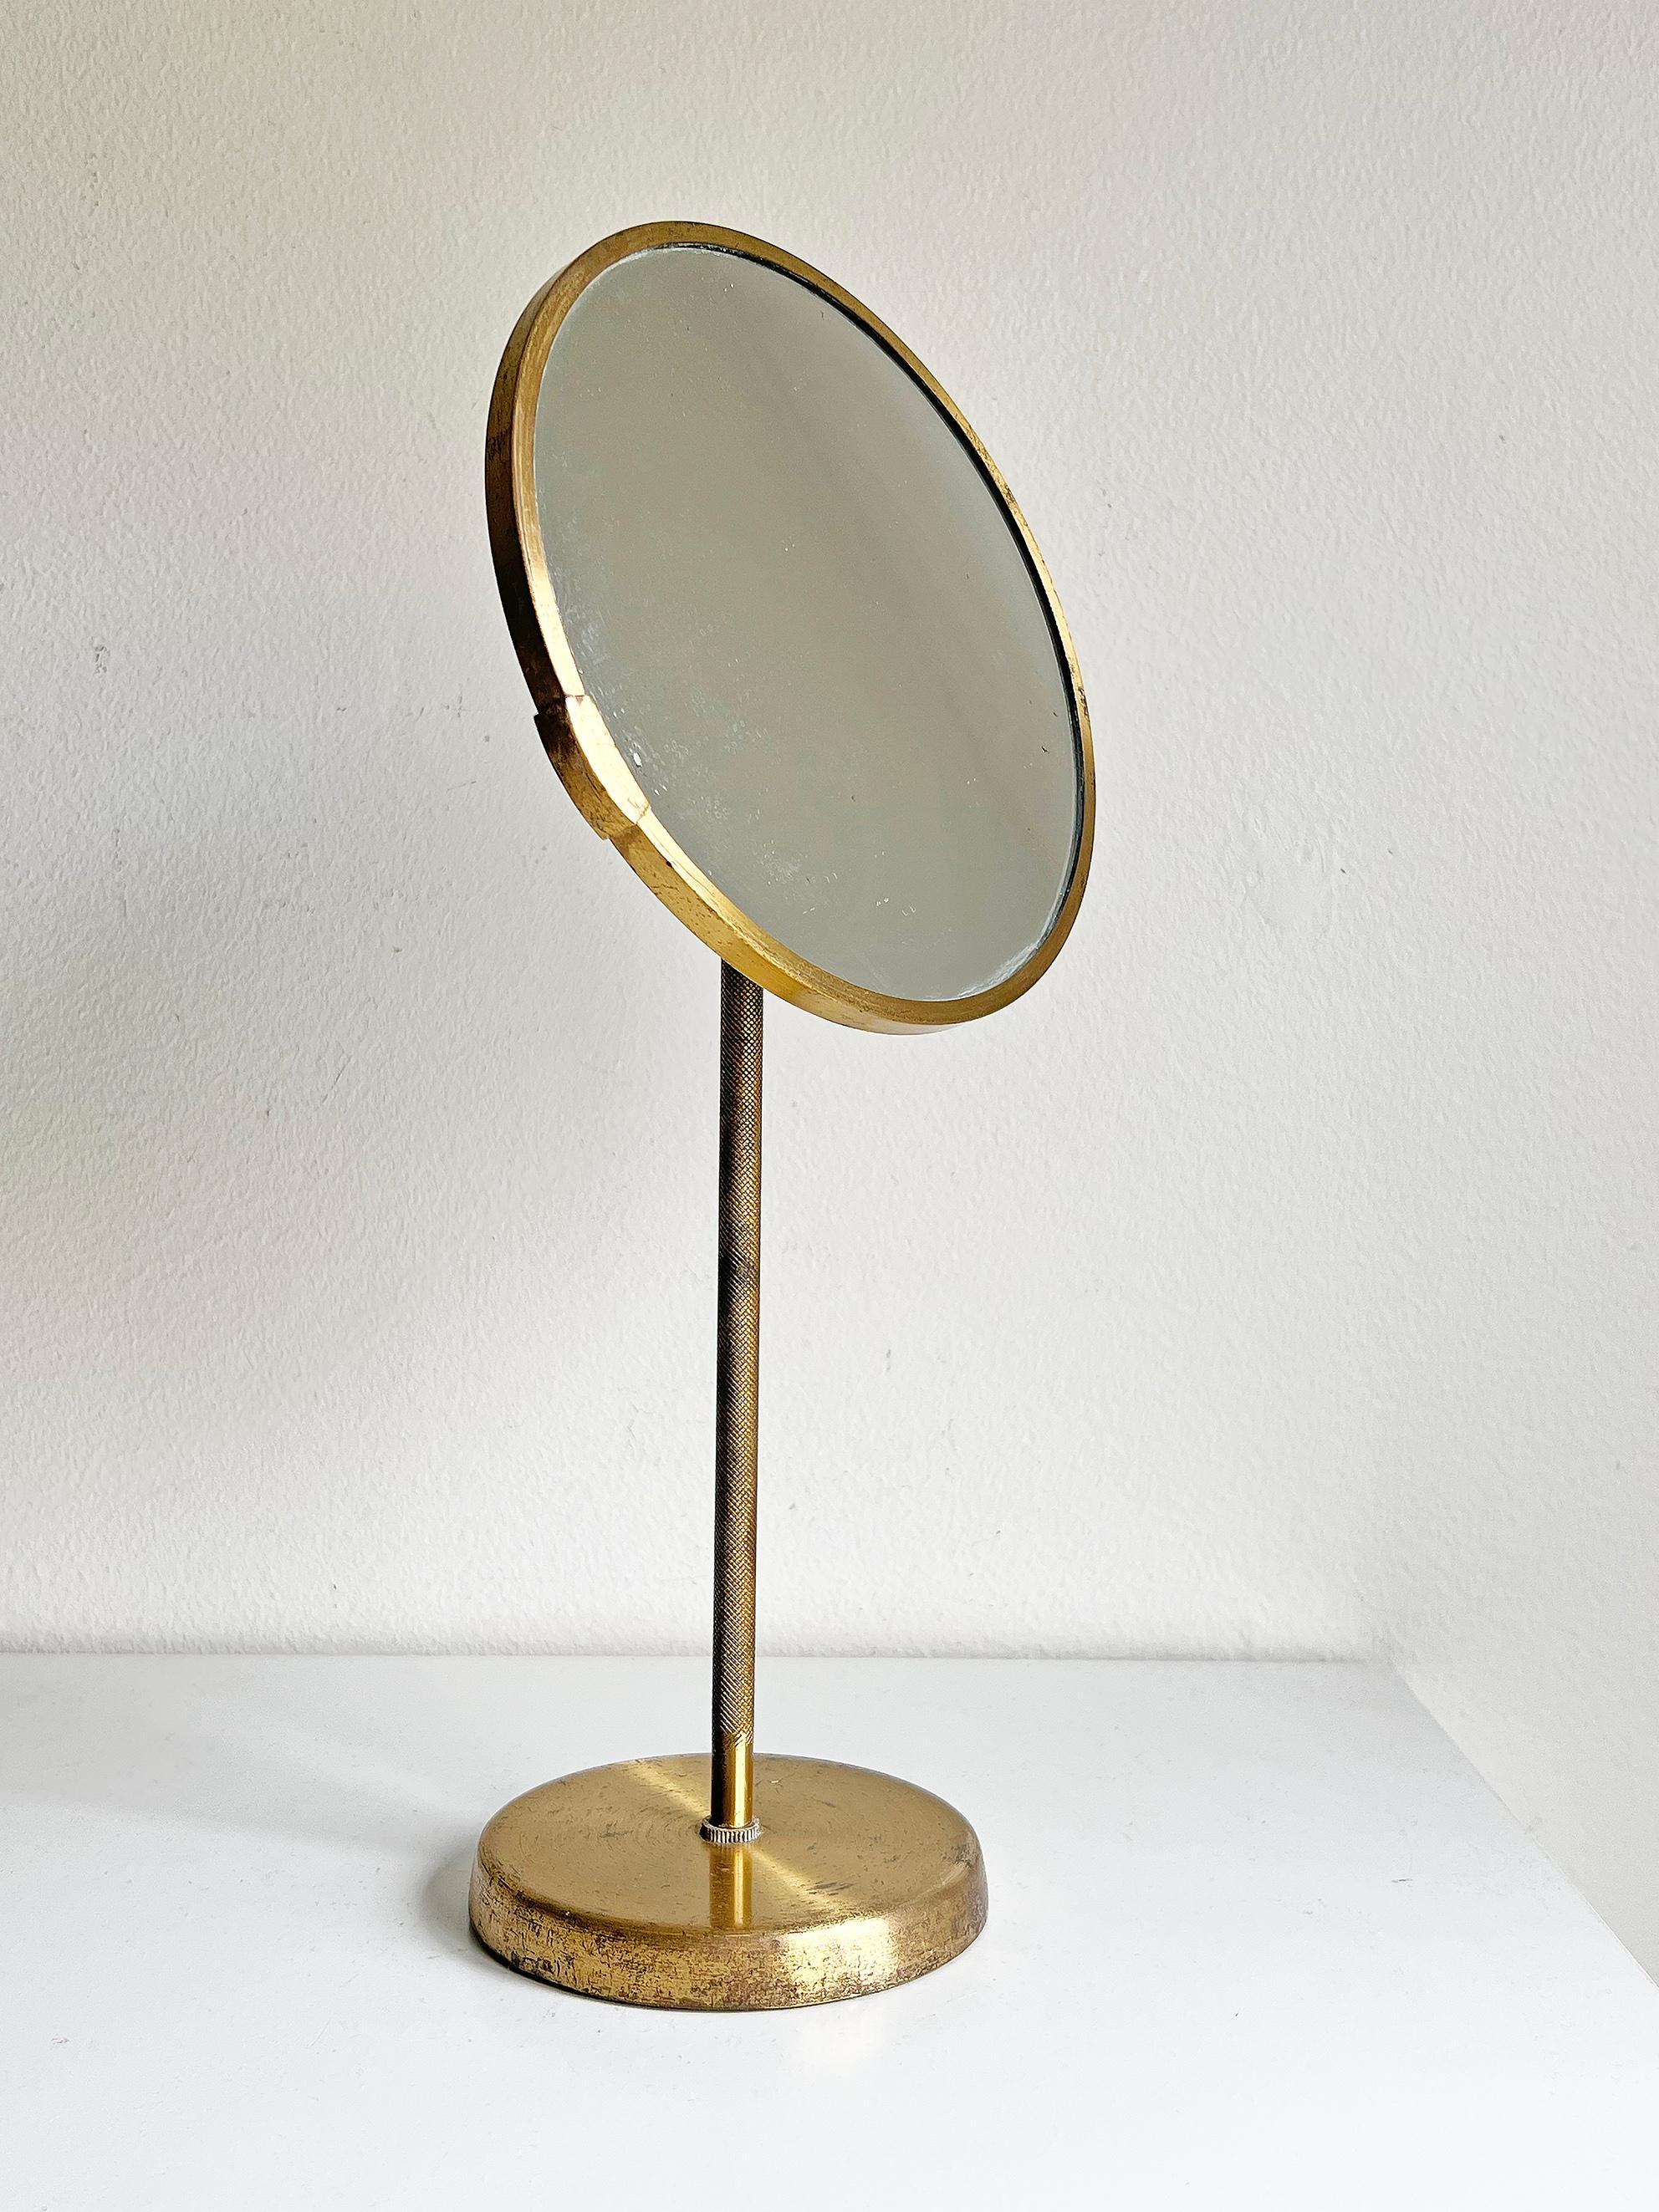 20th Century Mid-Century Modern Table Mirror in Brass, circa 1950s For Sale